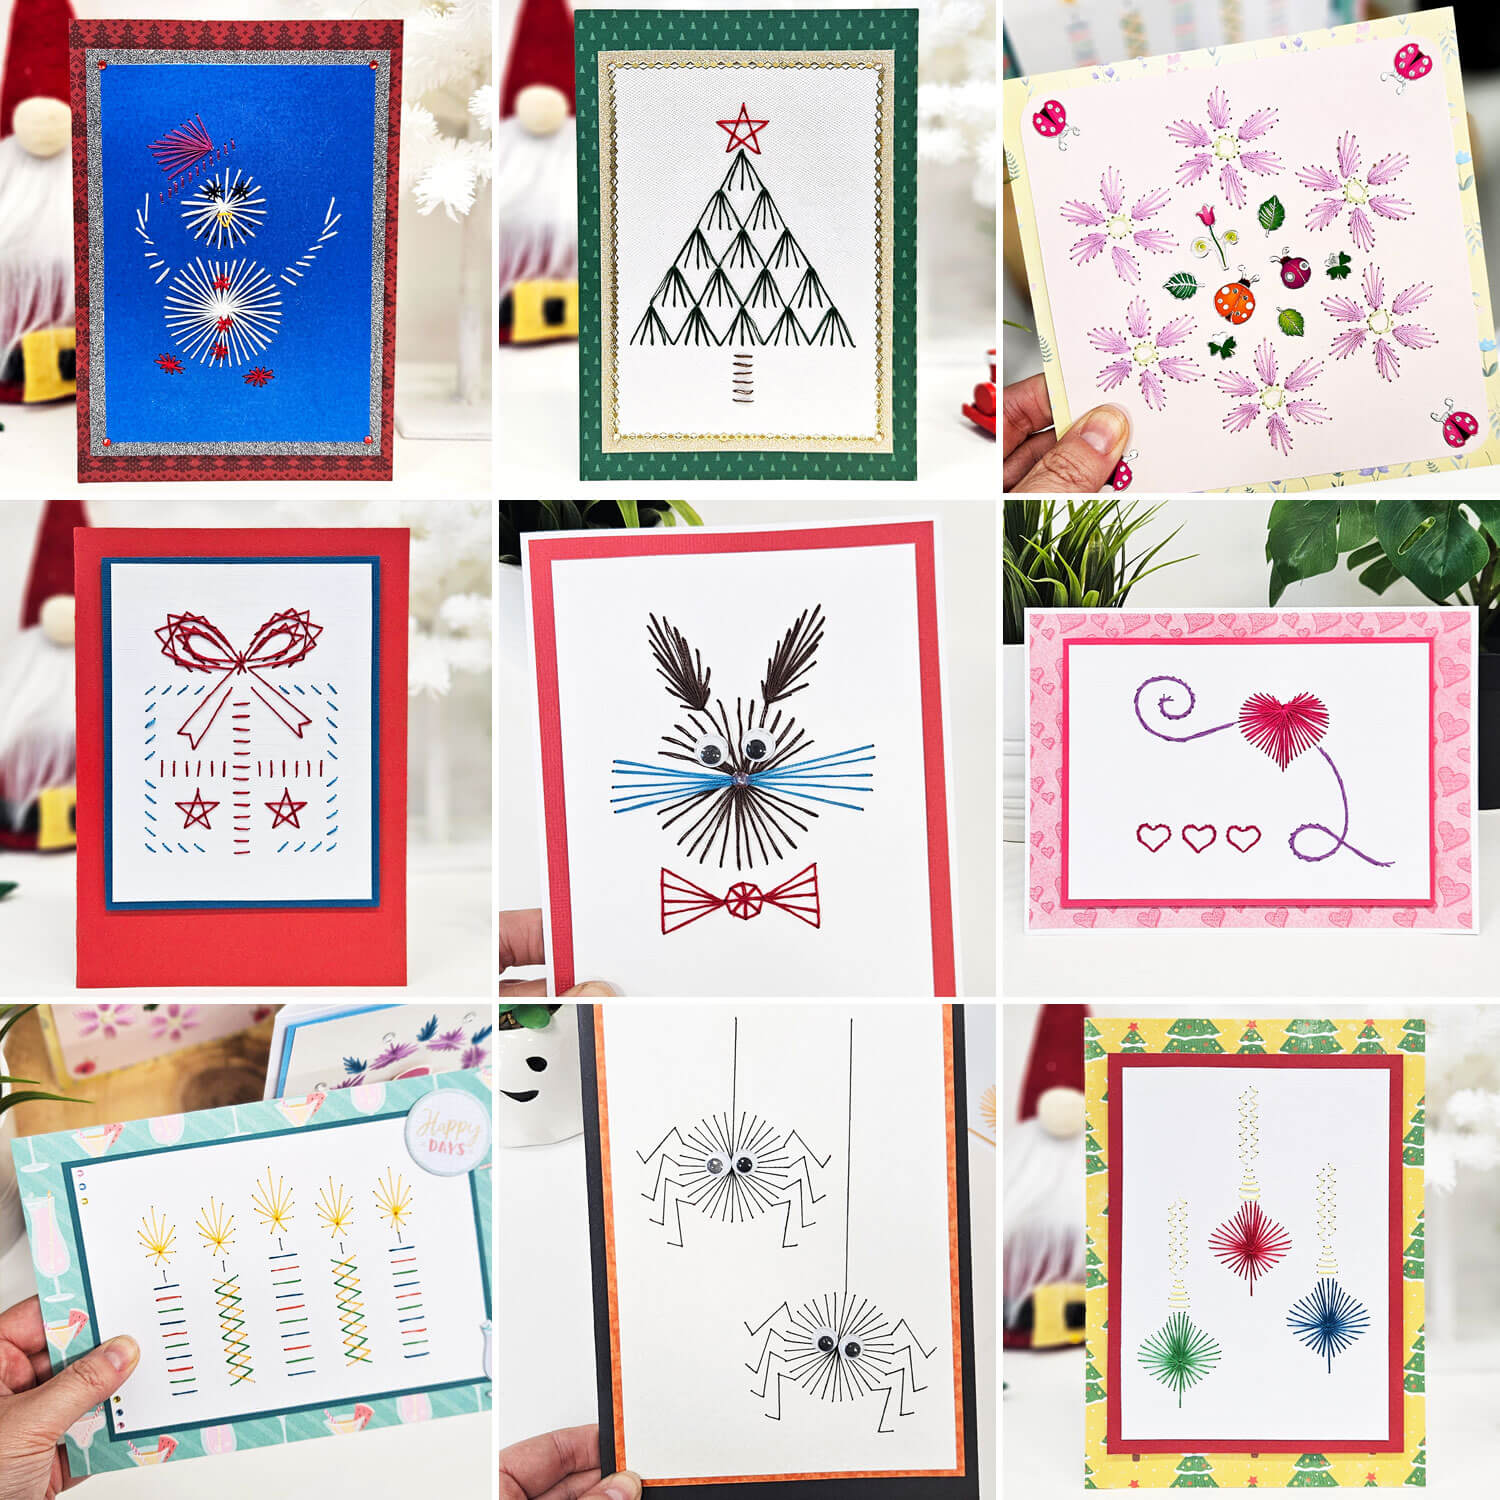 Card Stitching Patterns: Paper Embroidery on Cards (New Patterns!)